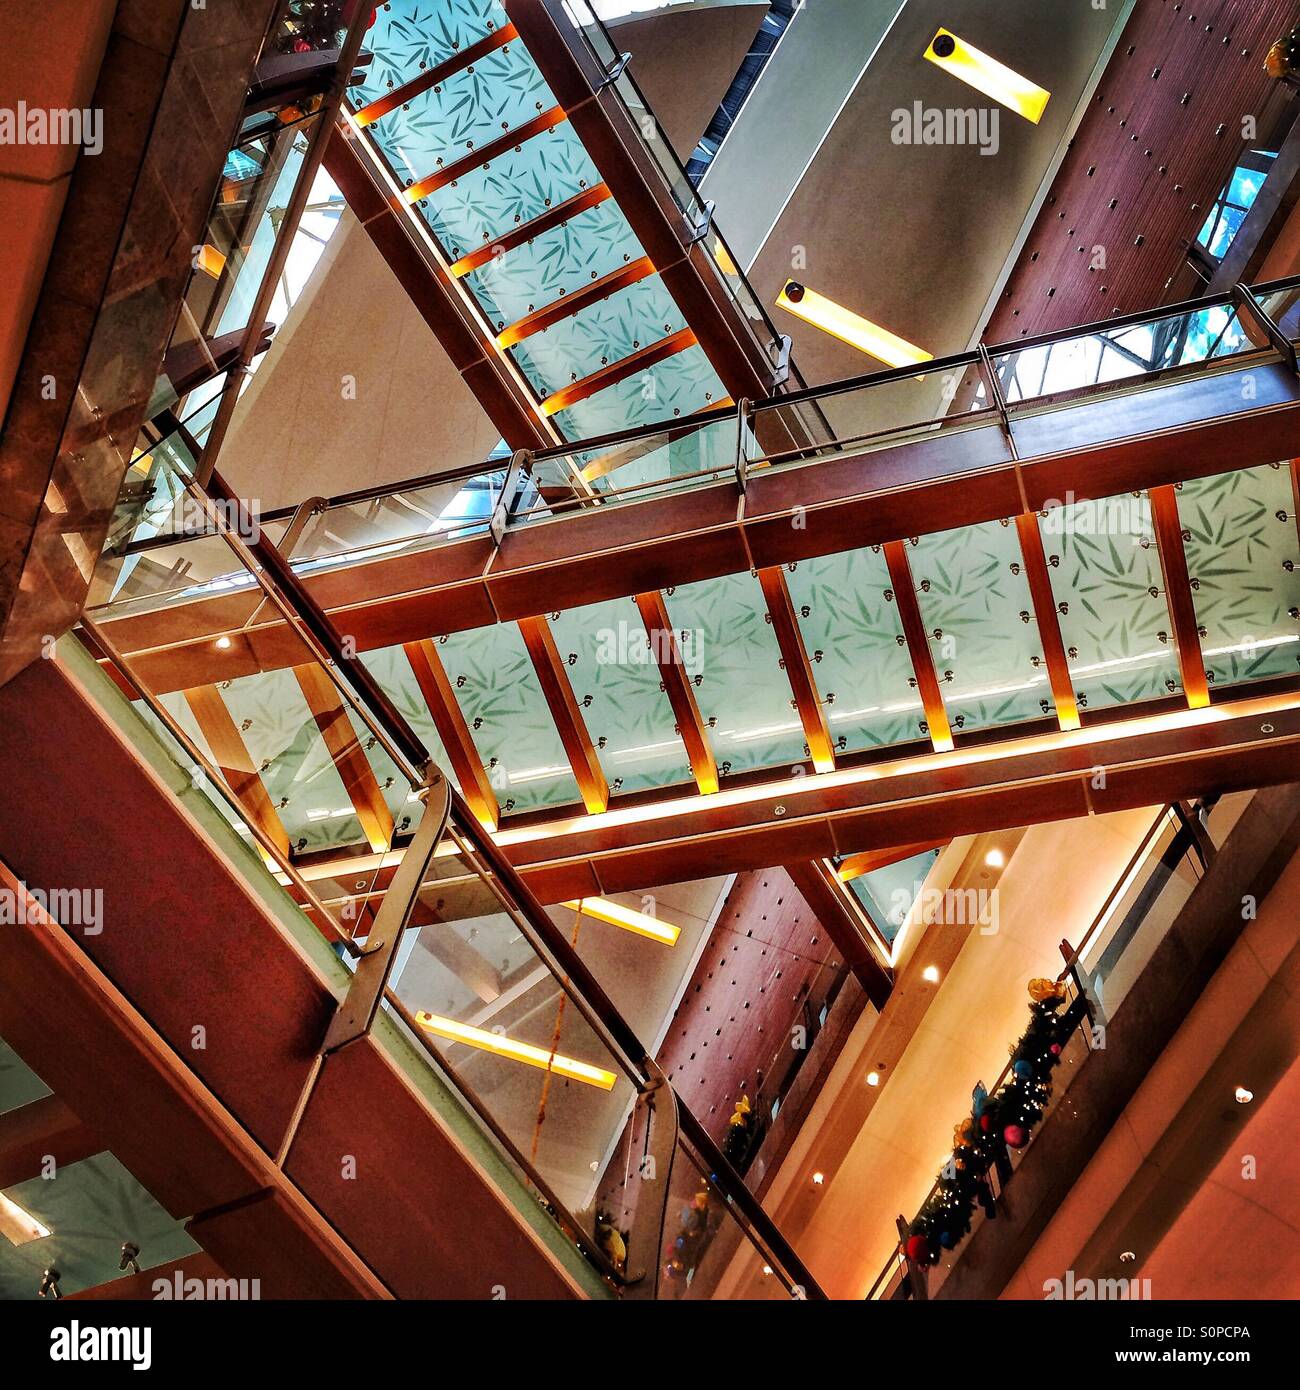 189 Mid Valley Megamall Images, Stock Photos, 3D objects